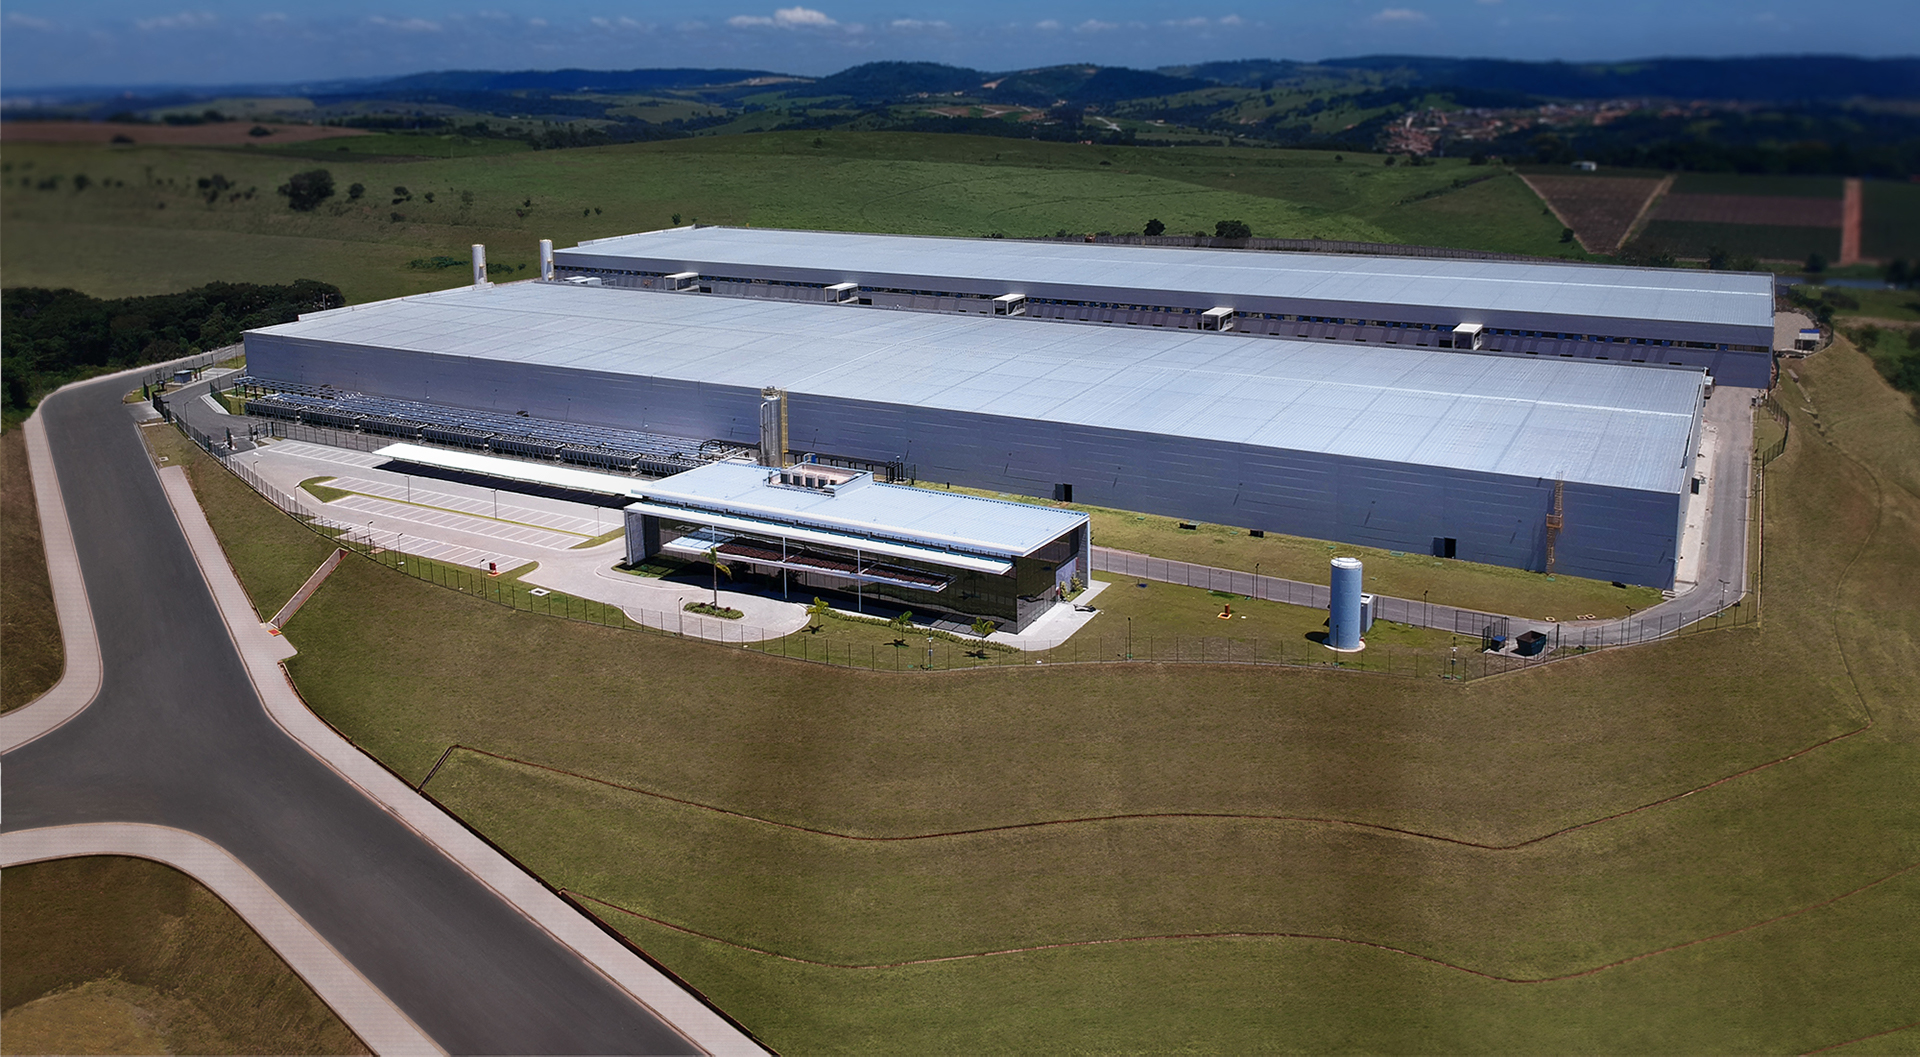 Ascenty achieves ISO 9001 certification for its data centers in Brazil